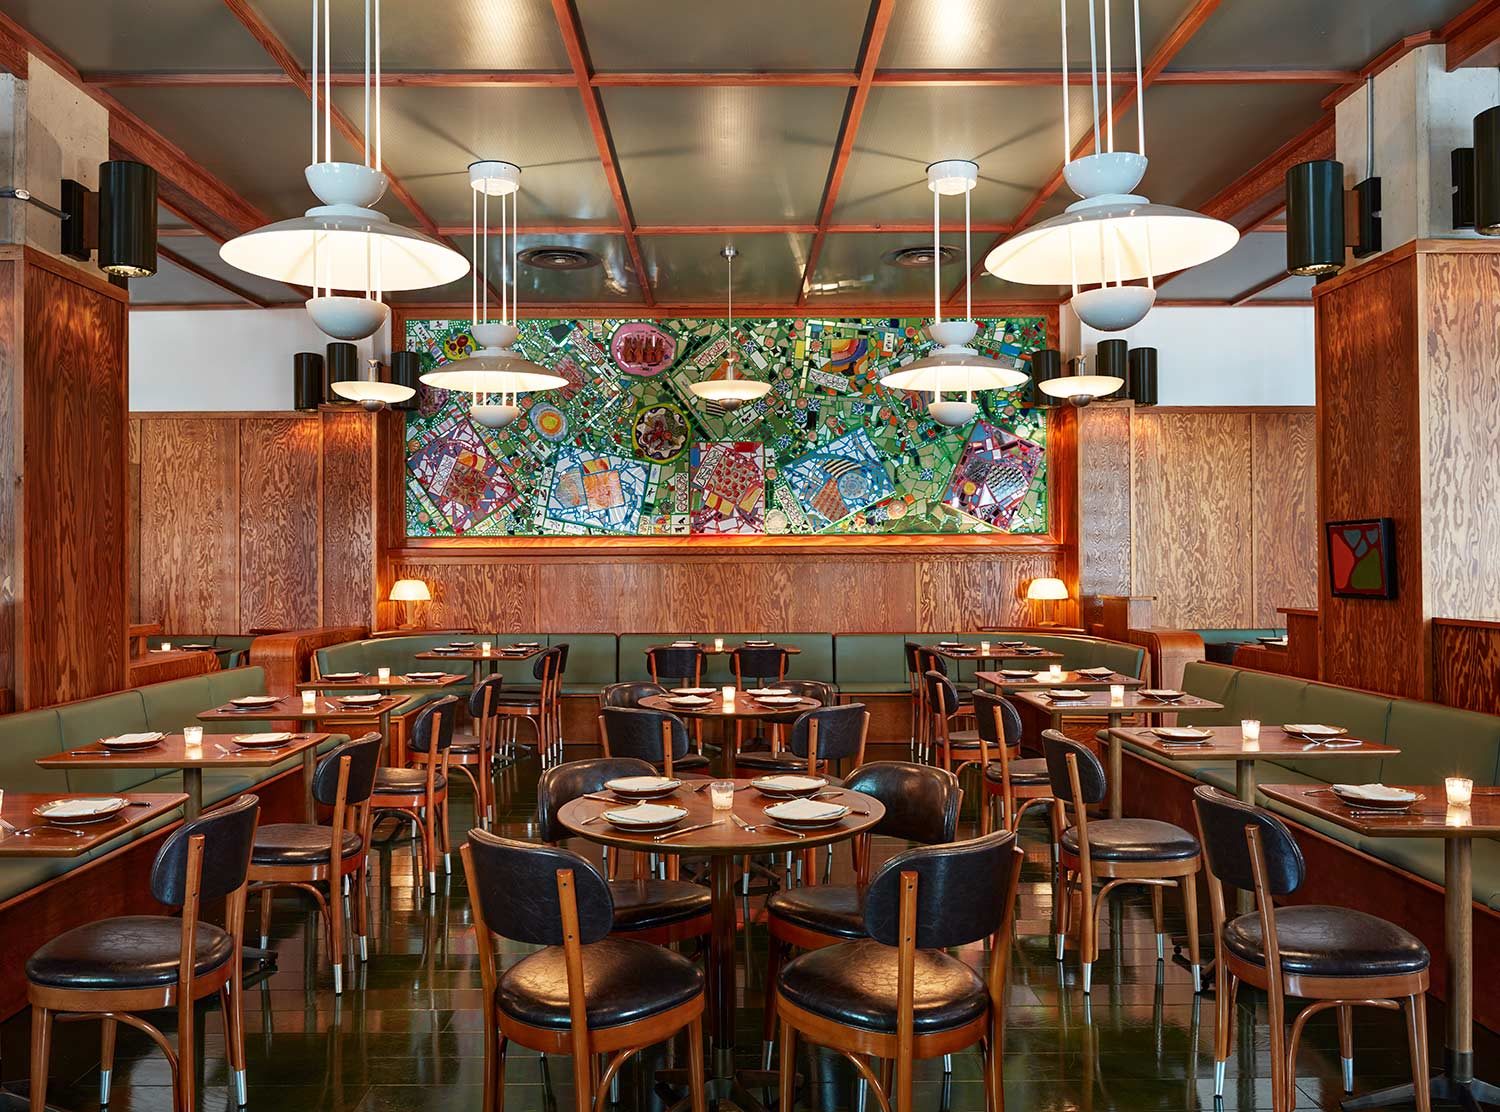 Ace Hotel Brooklyn As You Are restaurant by day, designed to perfection